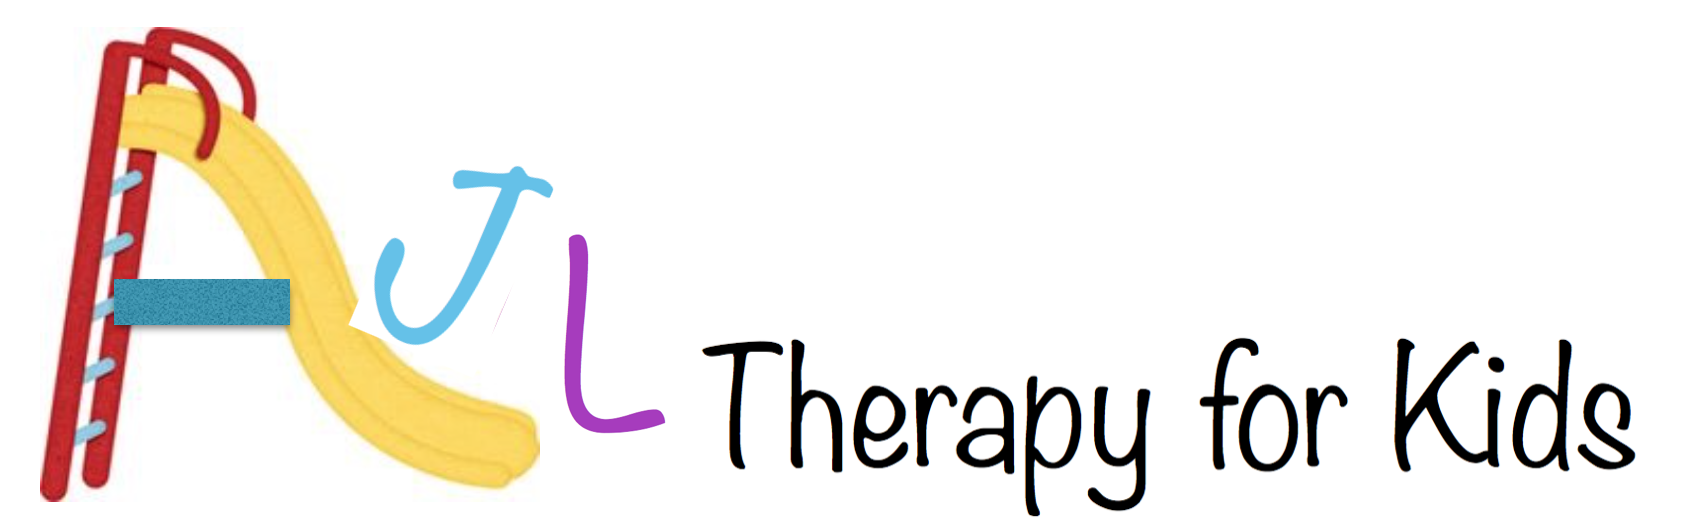 AJL Therapy for Kids